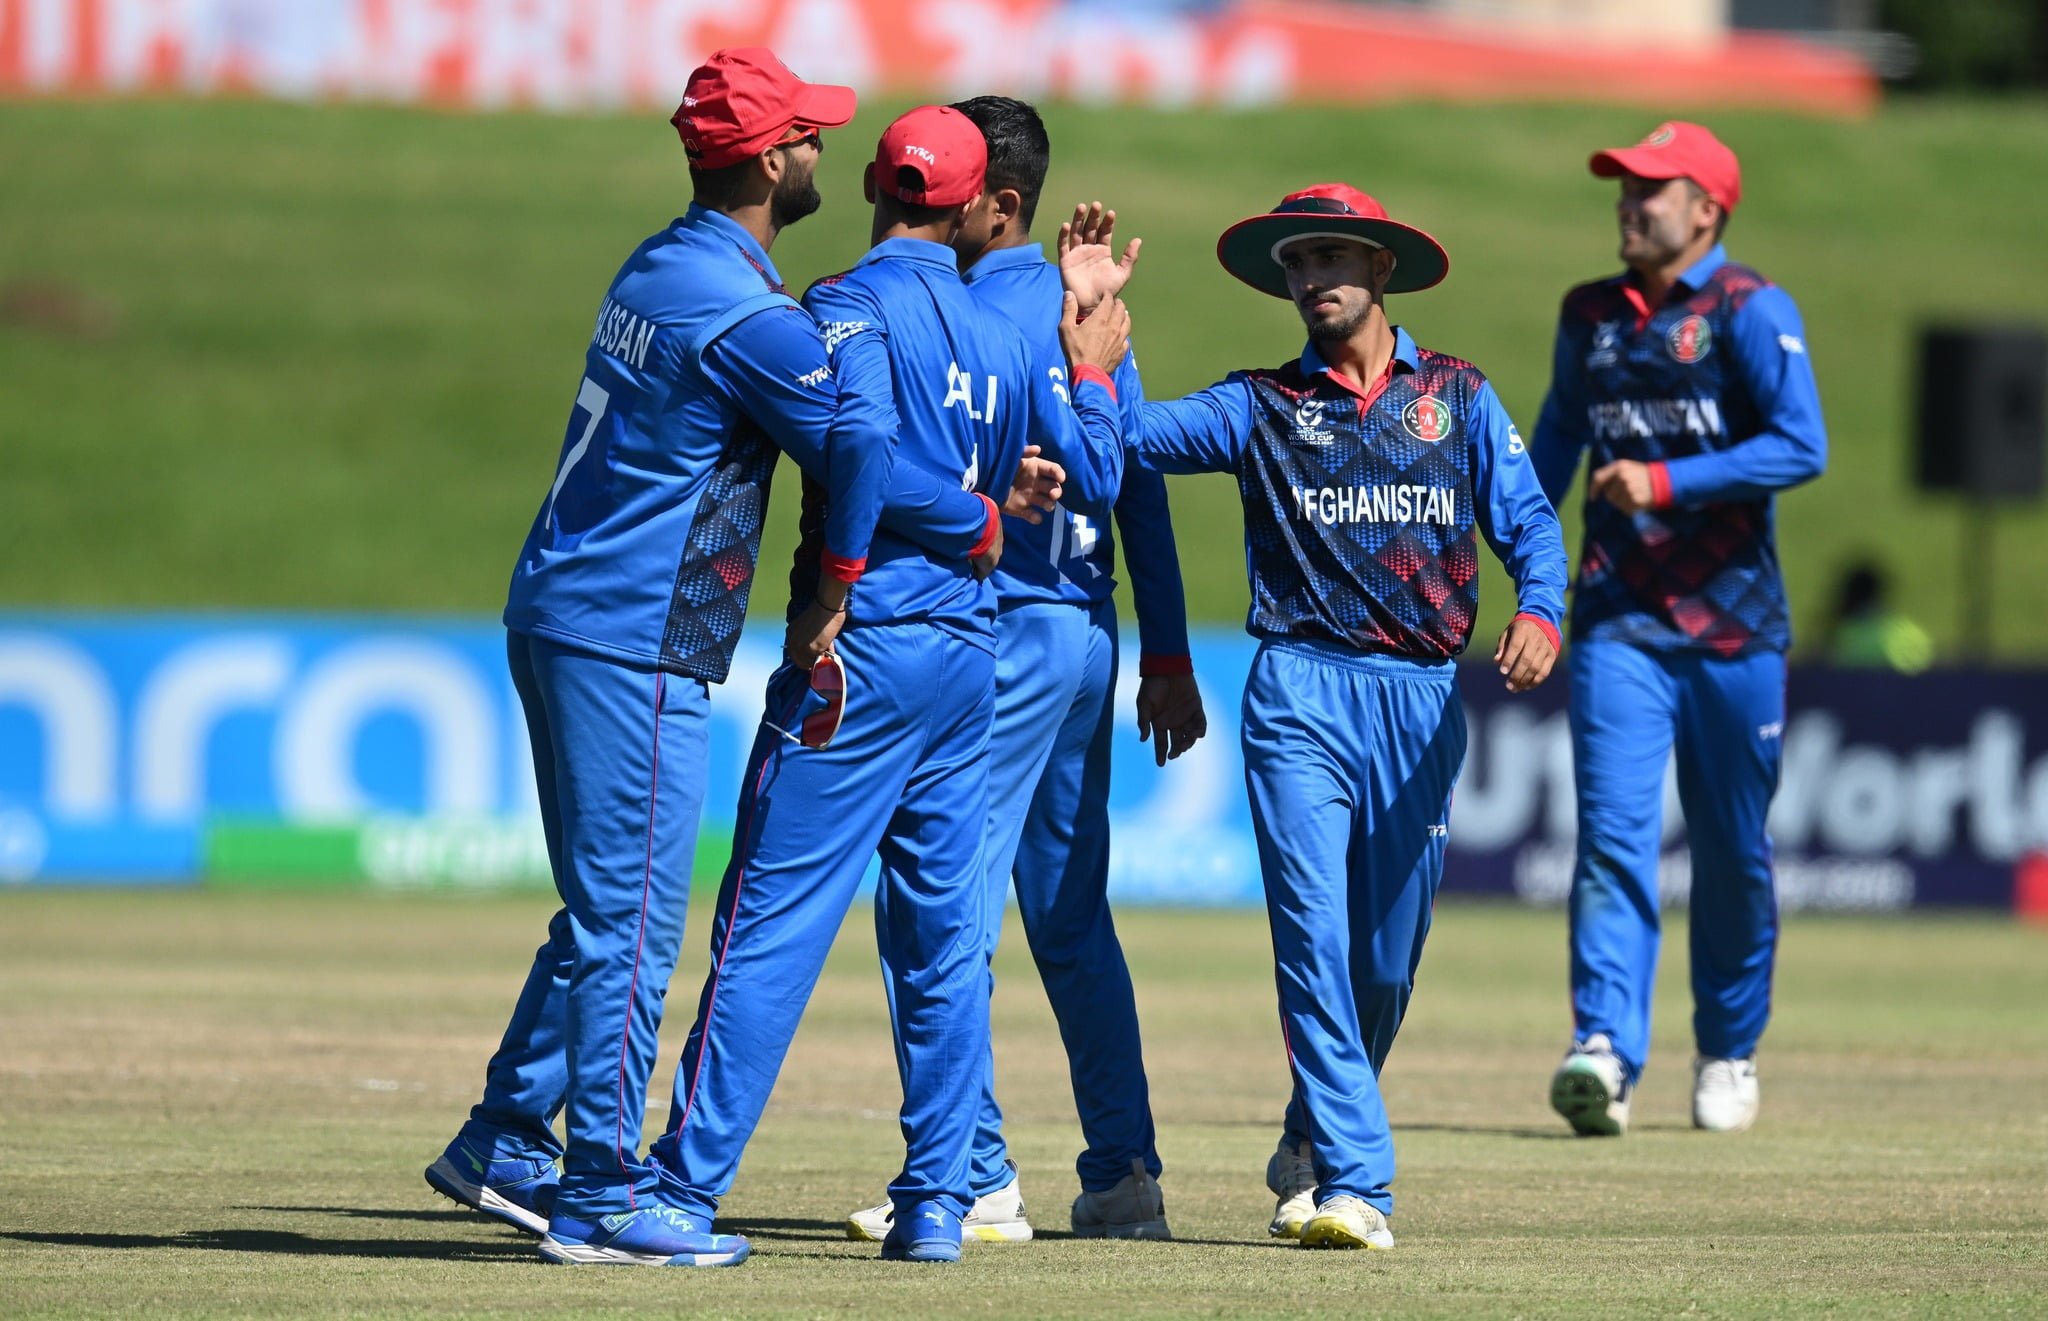 In the U-19 World Cup, Afghanistan played its last match against Nepal, losing by one wicket. The team also lost their first two matches to Pakistan and New Zealand.